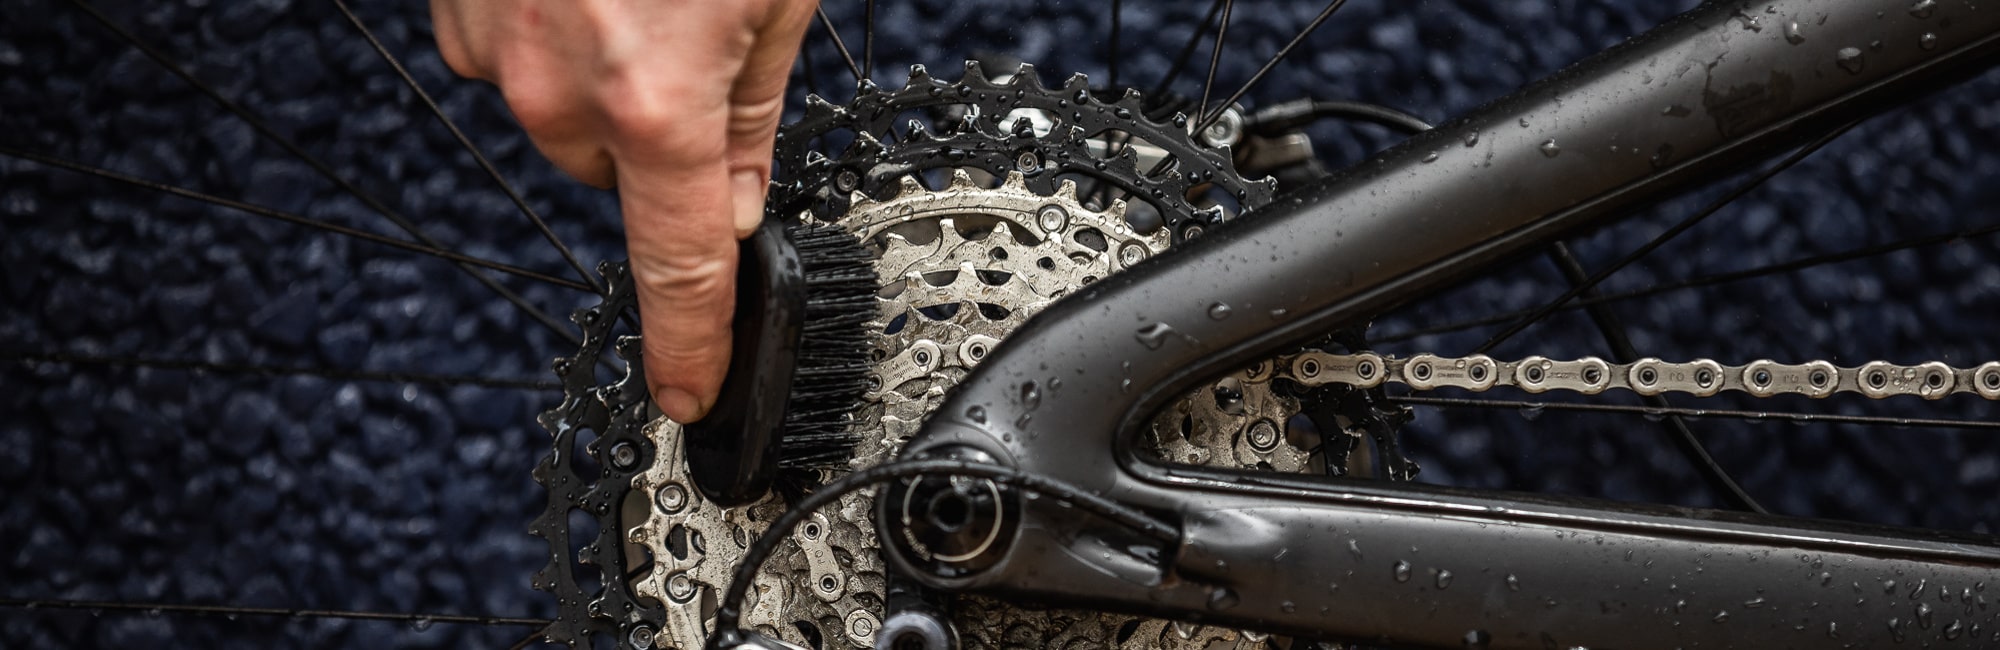 how to clean your bike